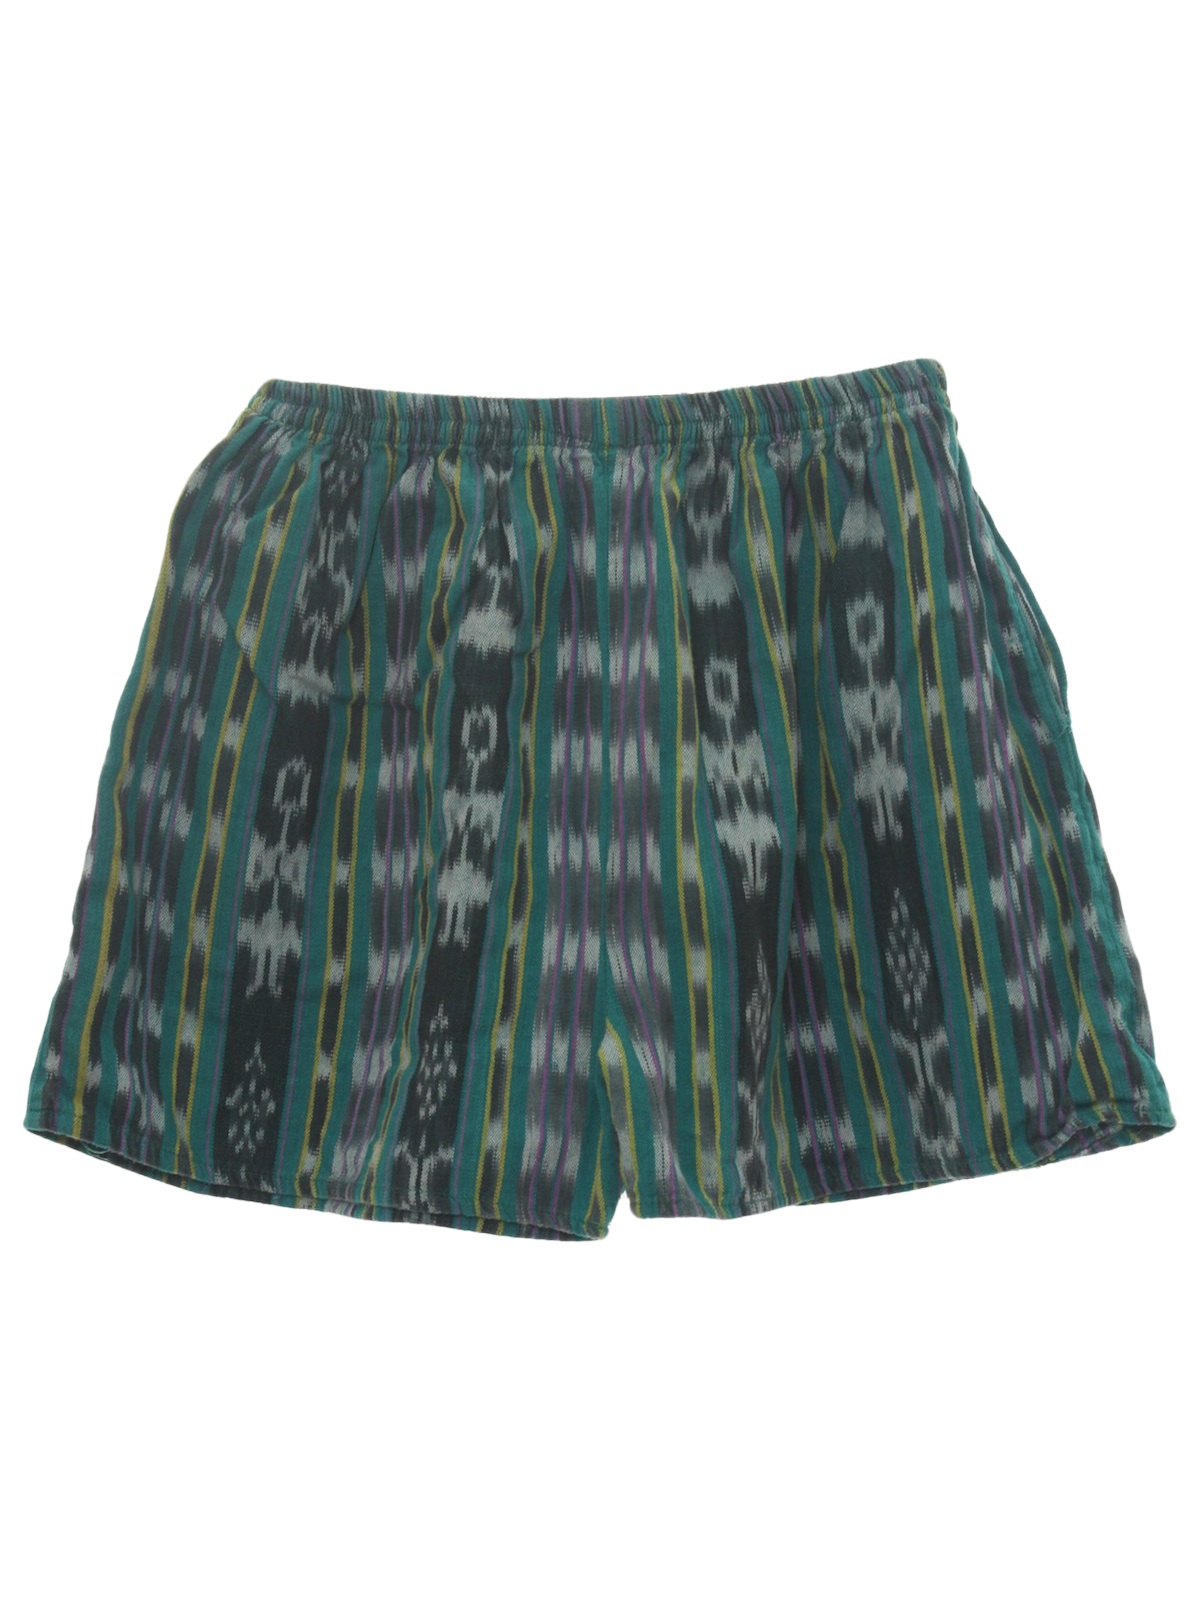 Retro 1980s Shorts: 80s -Missing Label- Mens shaded green, grey, off ...